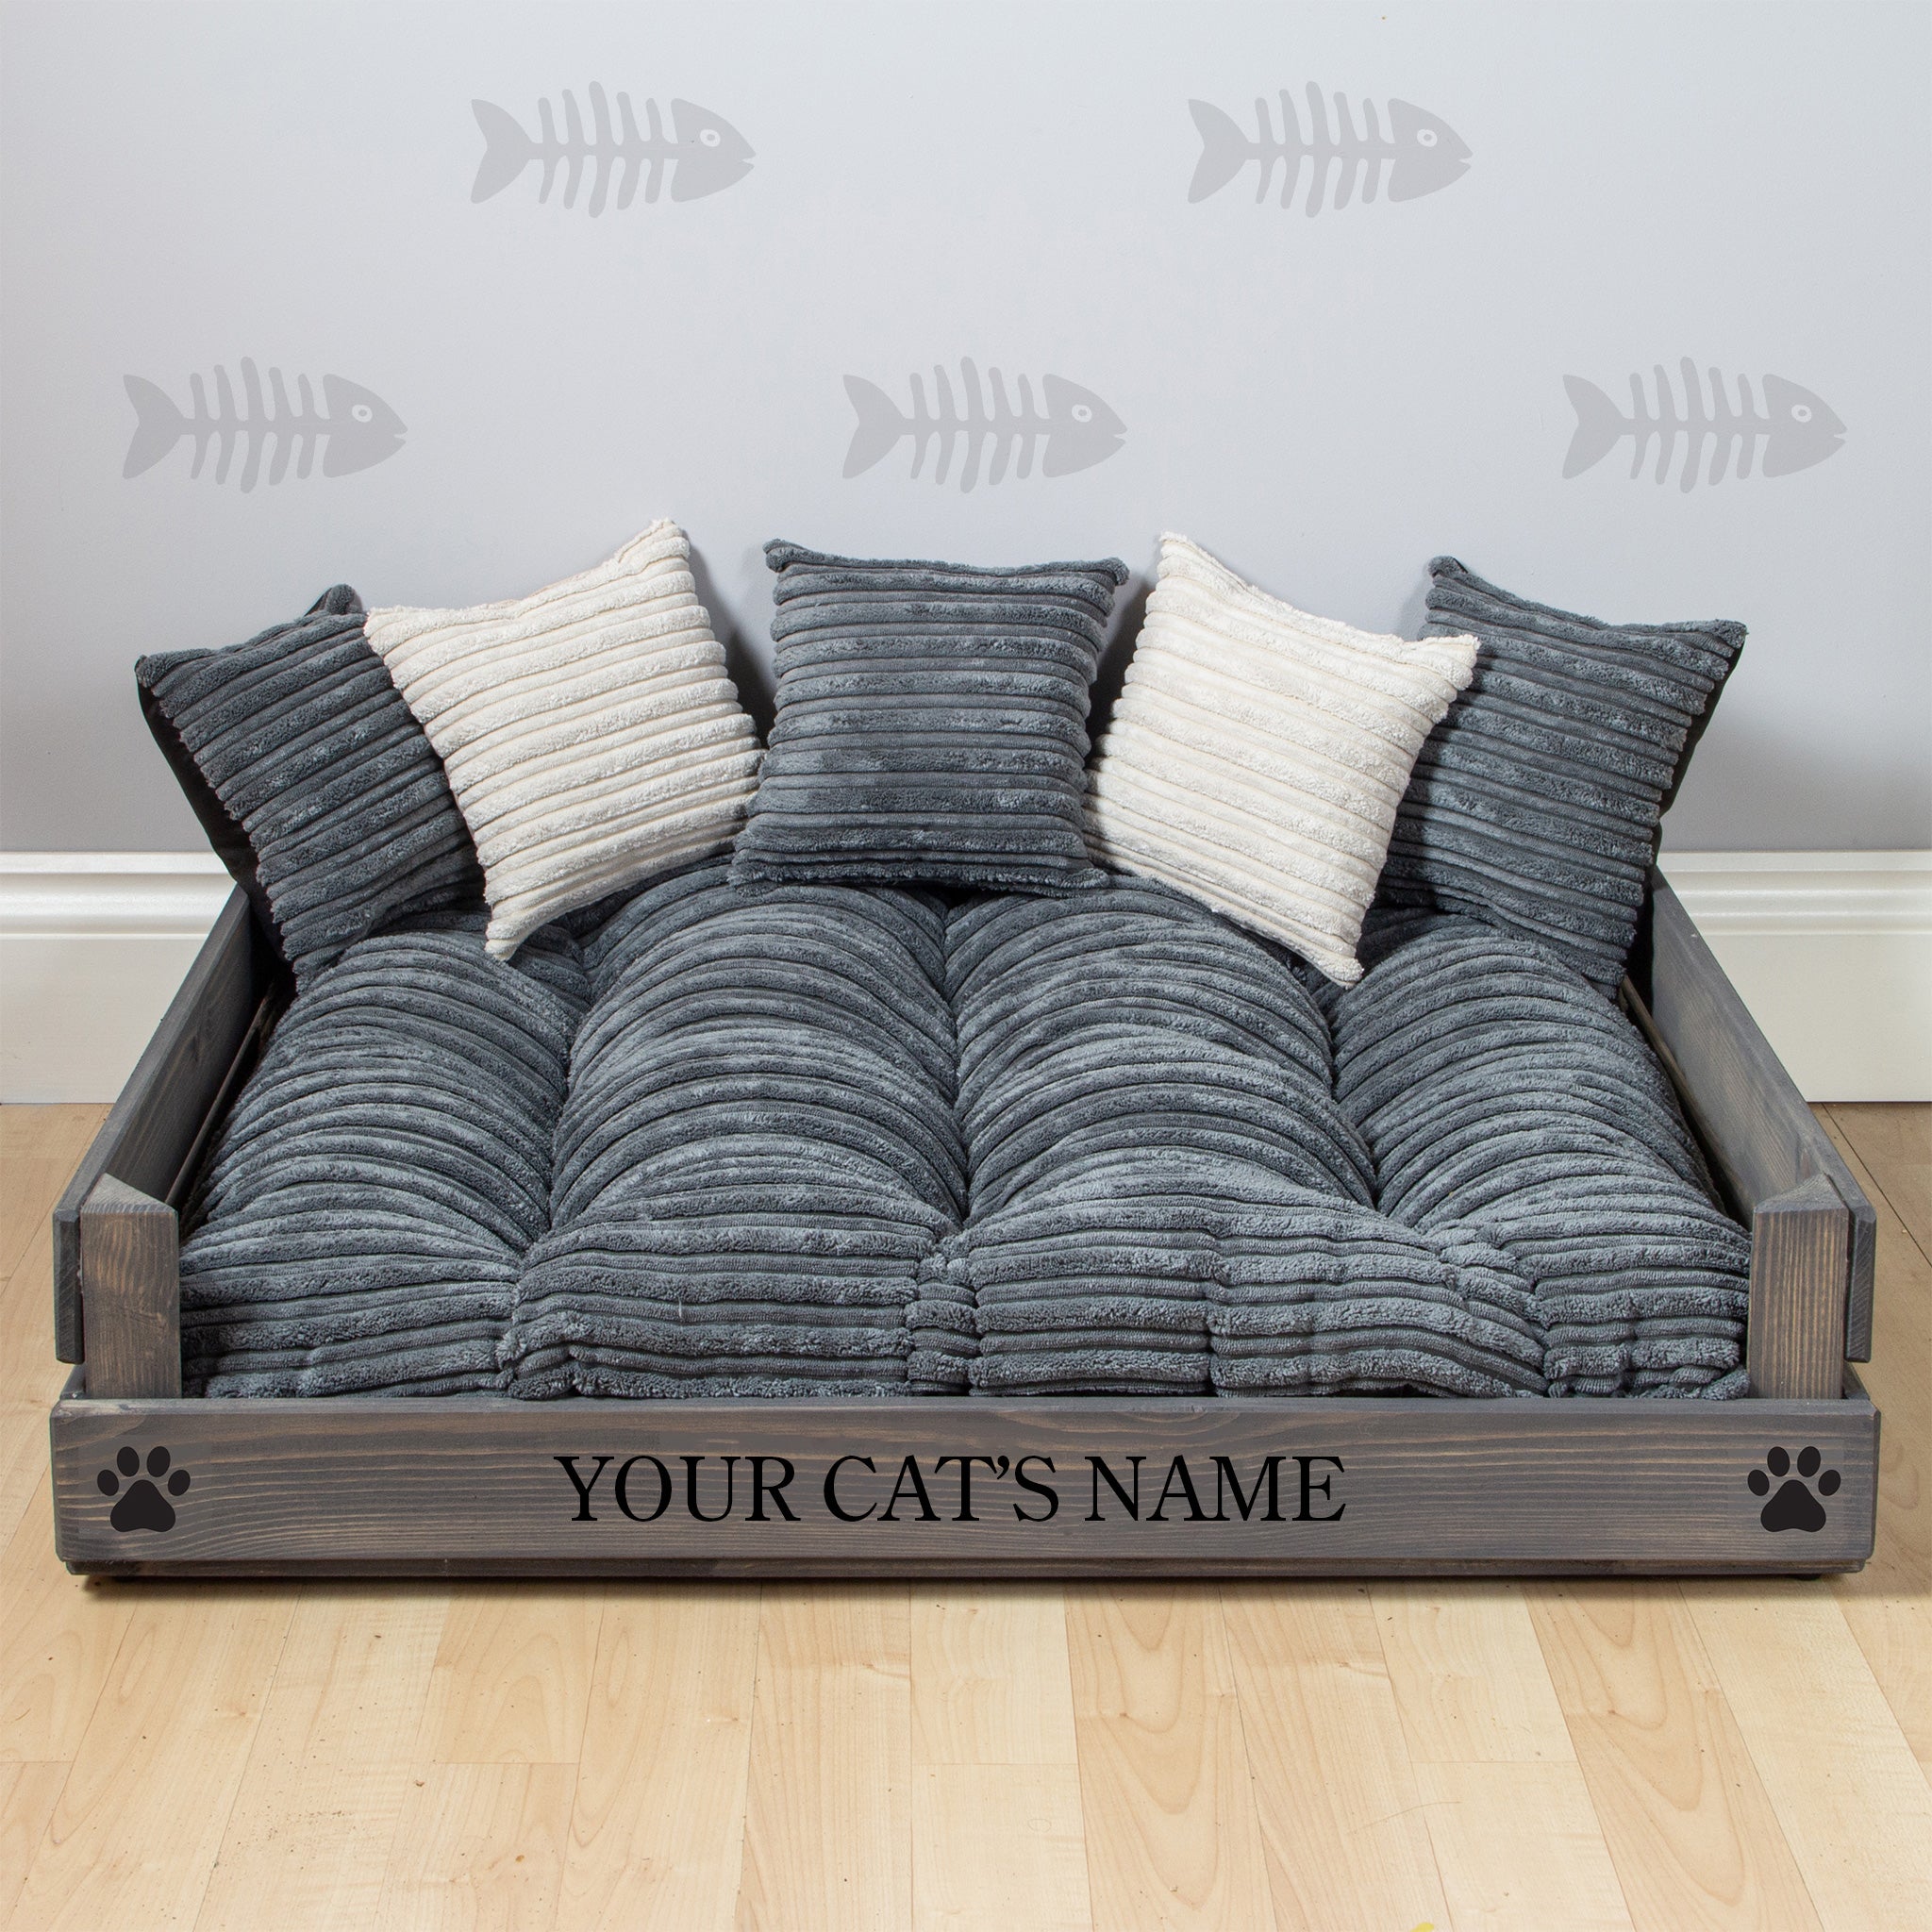 Wooden Personalised Cat Bed - Two Cats (59 x 76cm) - Ash Grey & Corduroy Grey